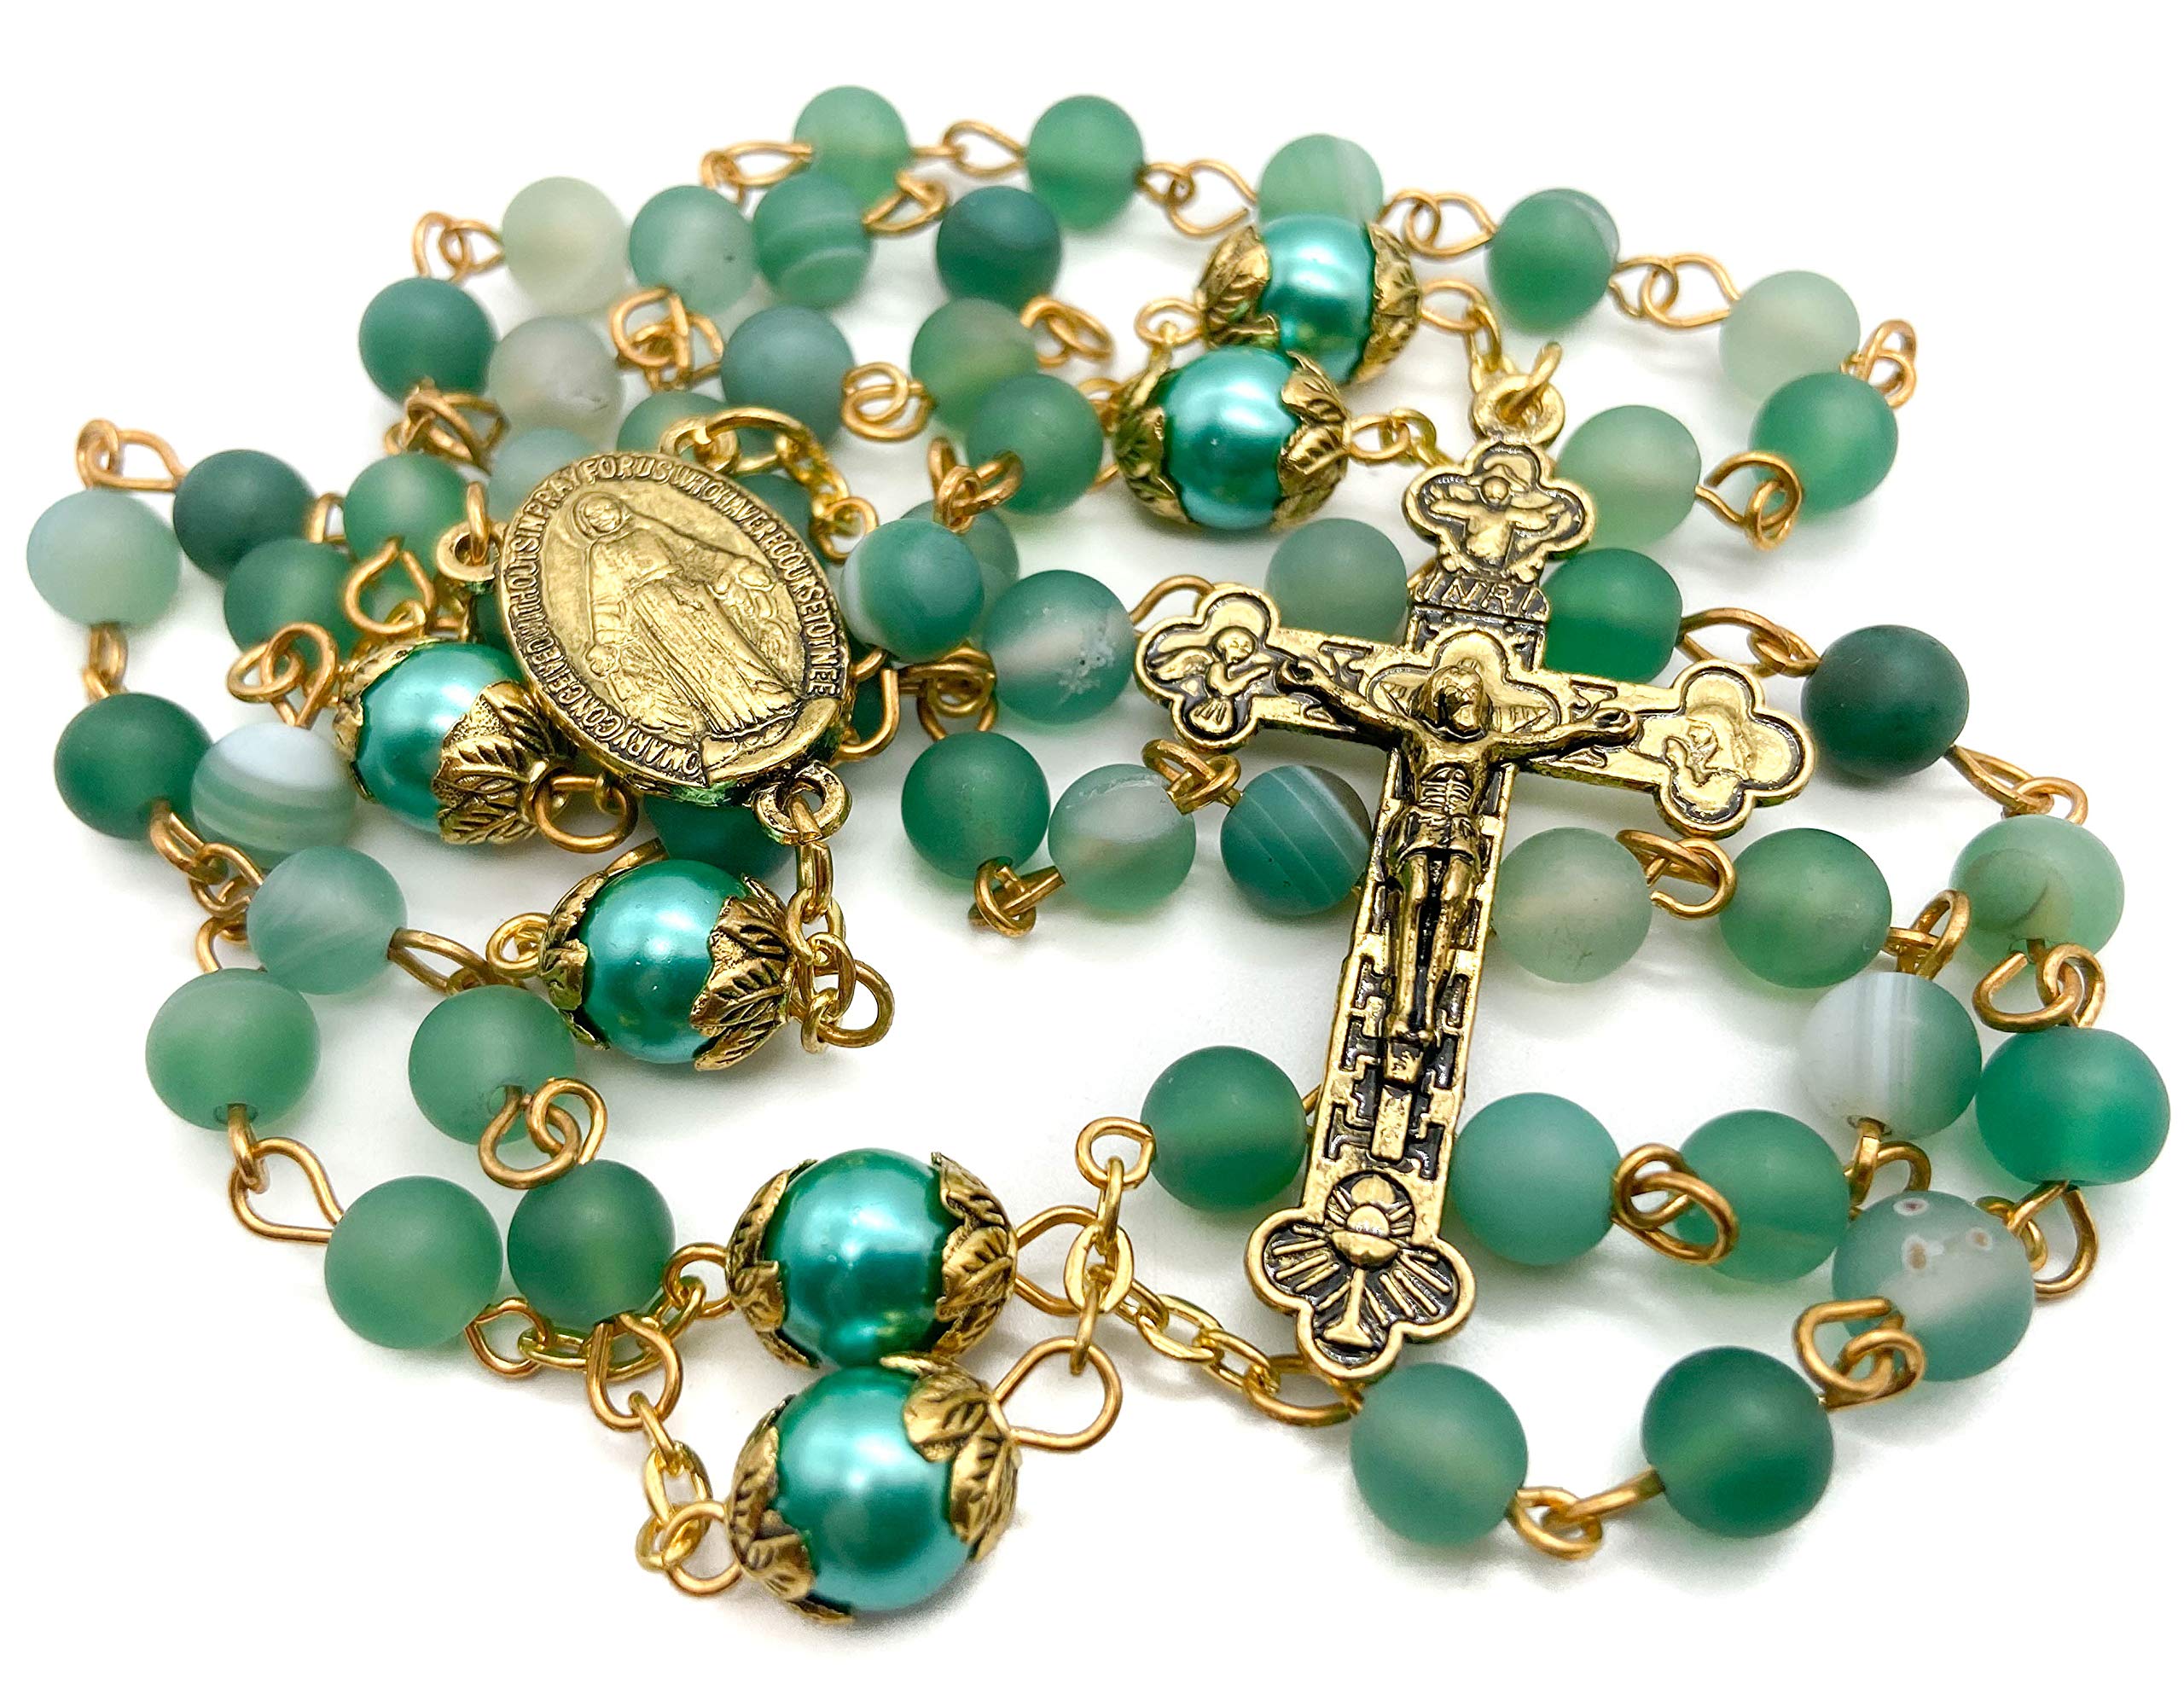 Nazareth Store Catholic Gold Rosary Necklace Matte Stone Beads Green 10mm Pearl Round Beads Miraculous Medal & Cross - Velvet Bag